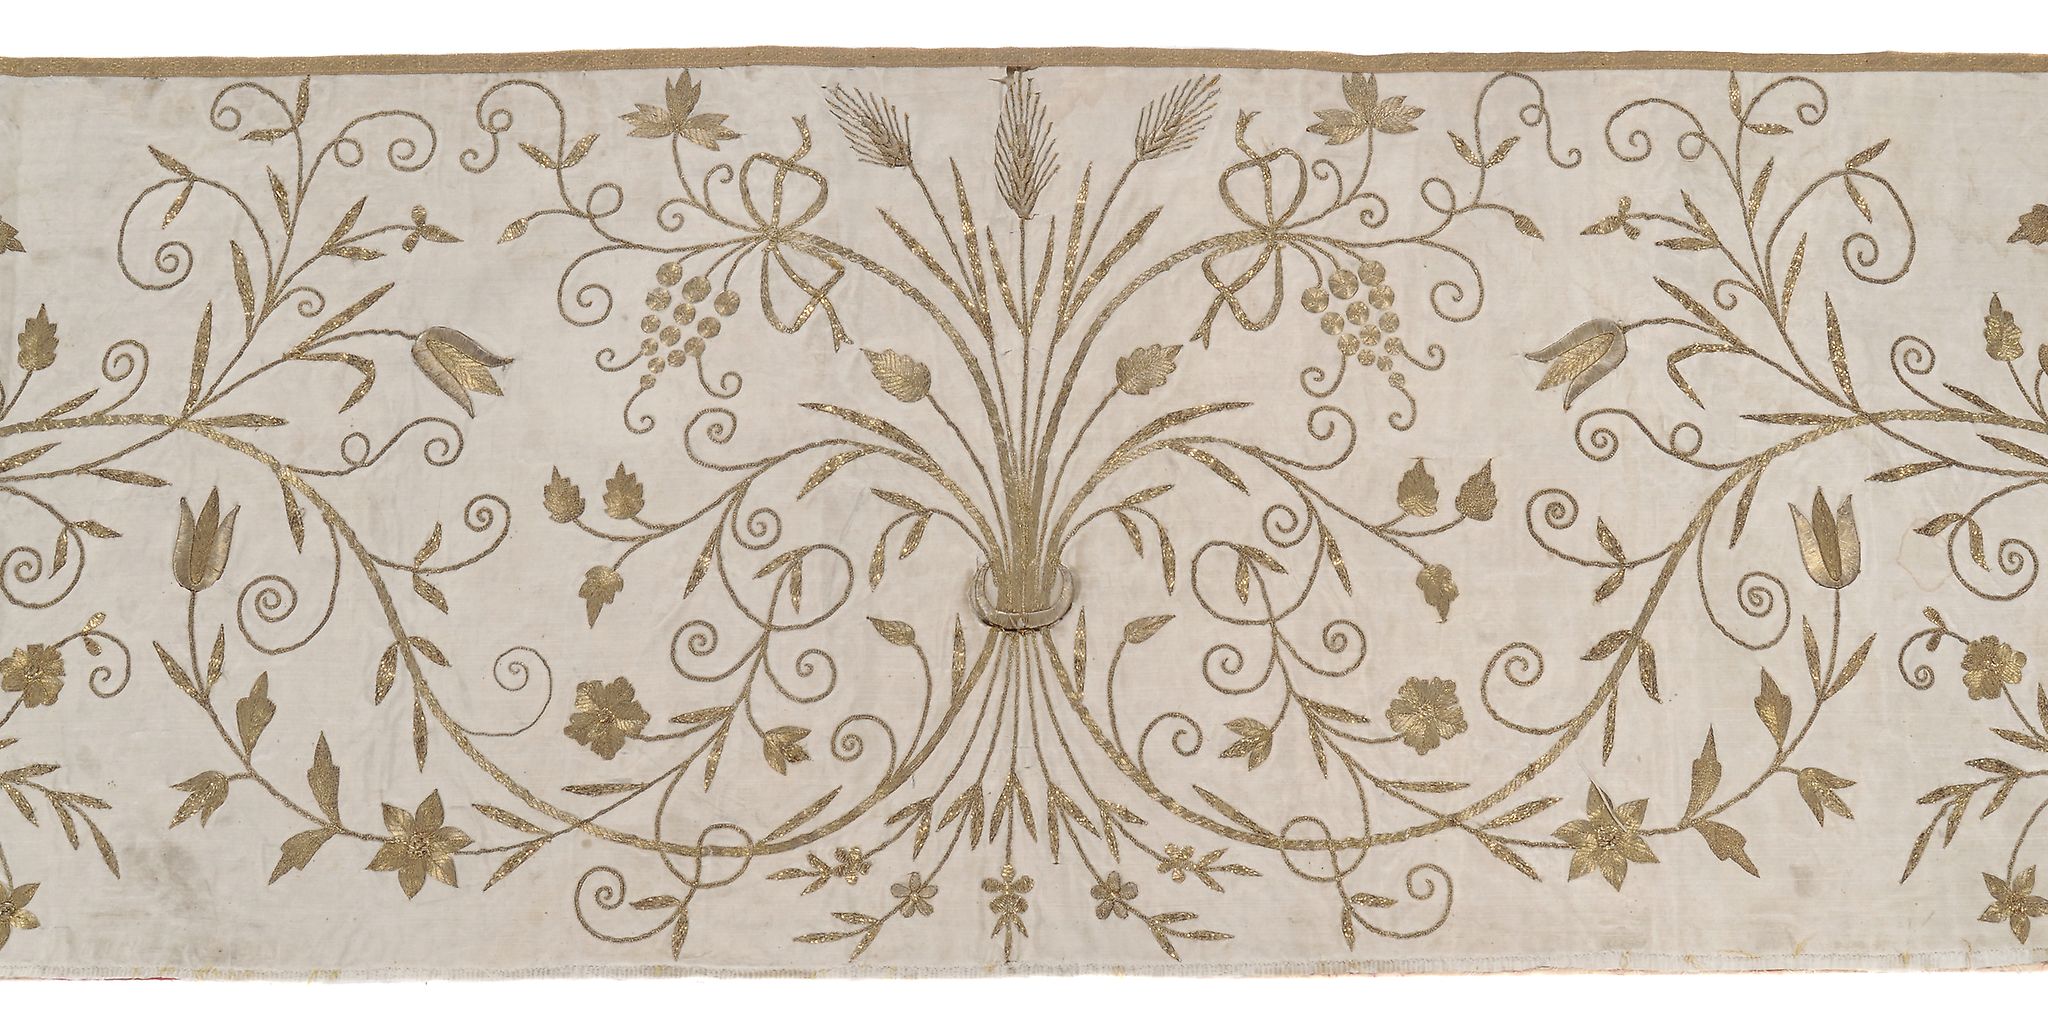 A Continental late 17th century gilt-metal embroidered floral silk panel - Image 5 of 8